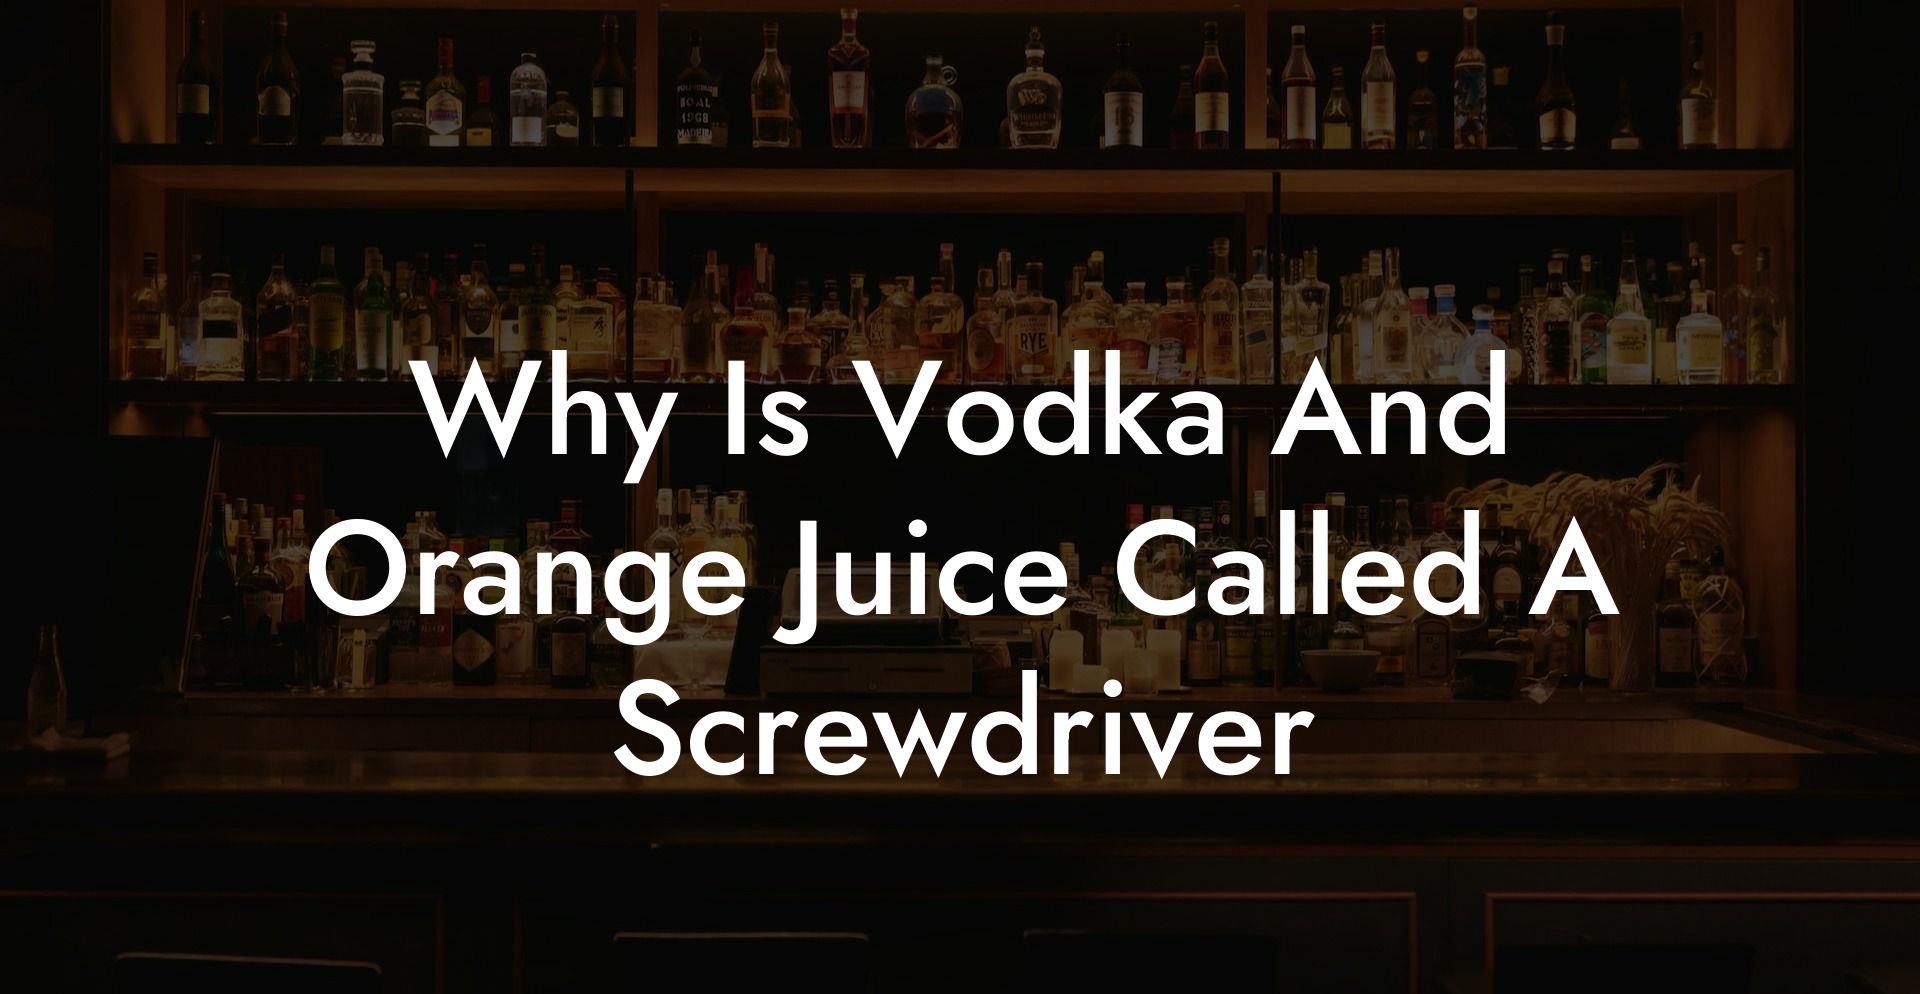 Why Is Vodka And Orange Juice Called A Screwdriver